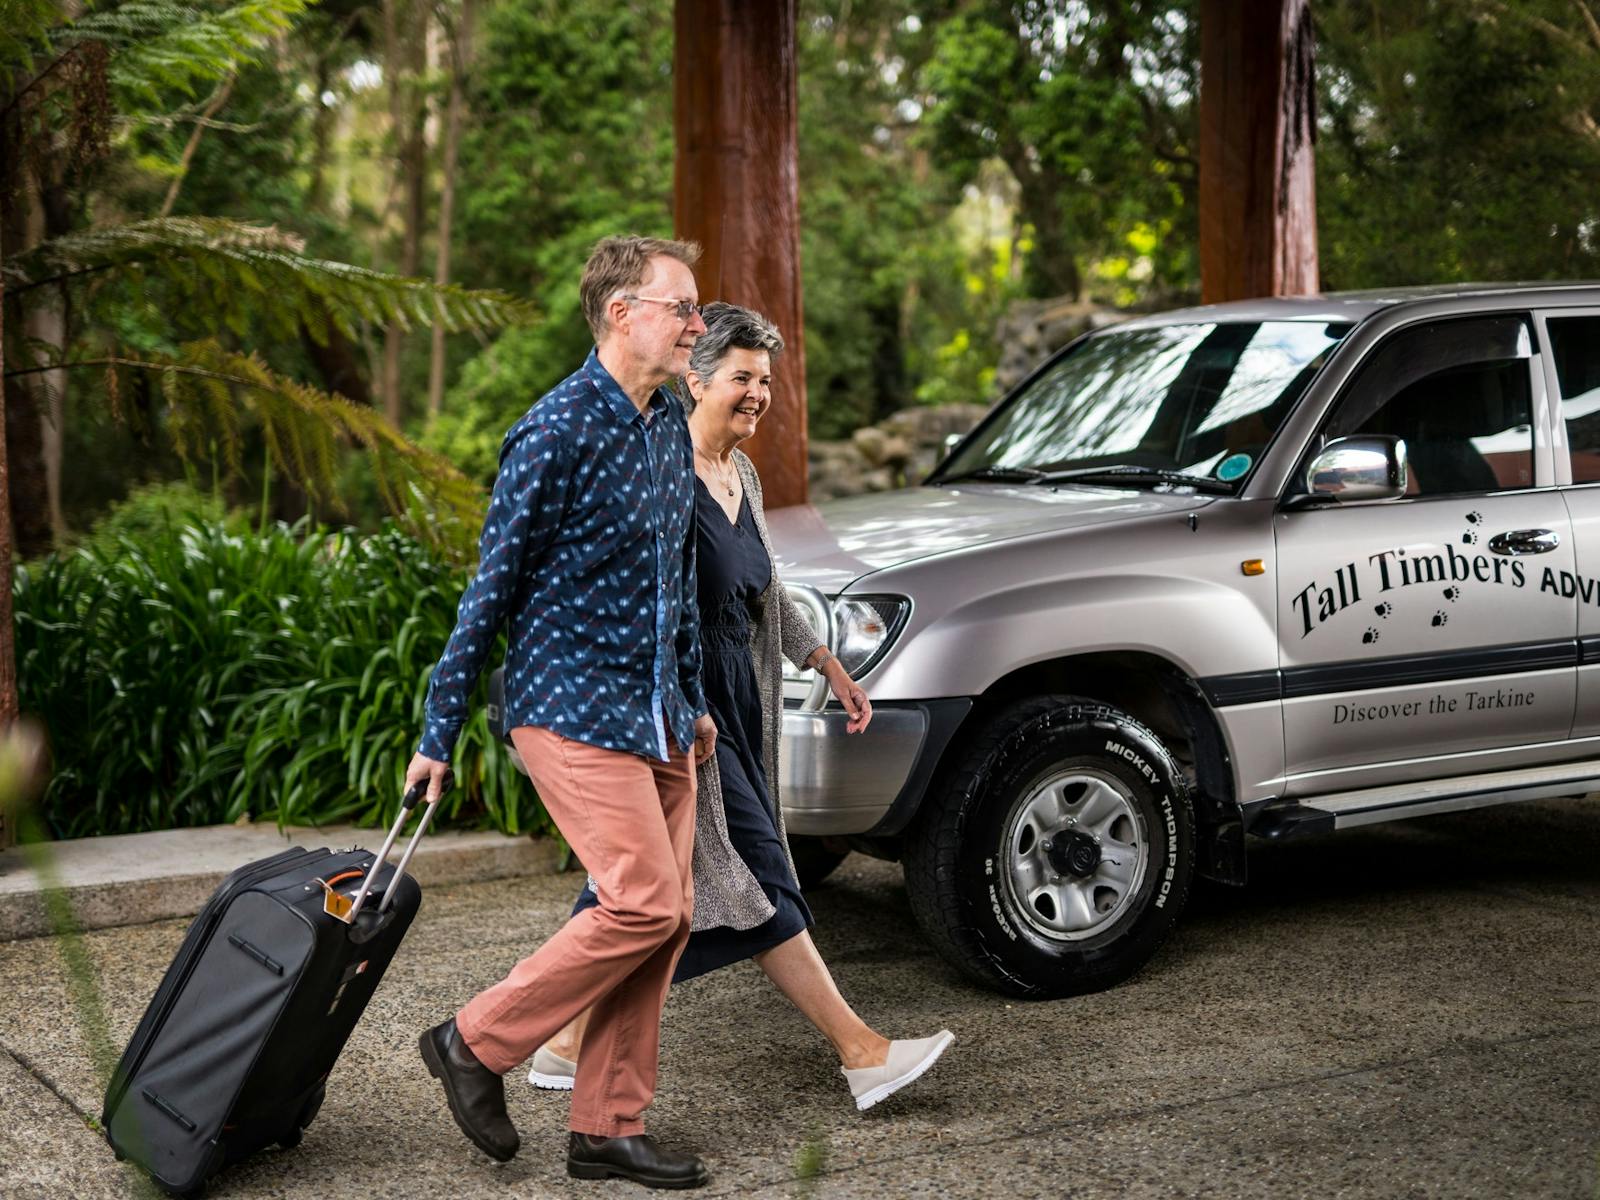 Couple arriving to Tall Timbers with luggage  with Adventure Tour 4WD in background